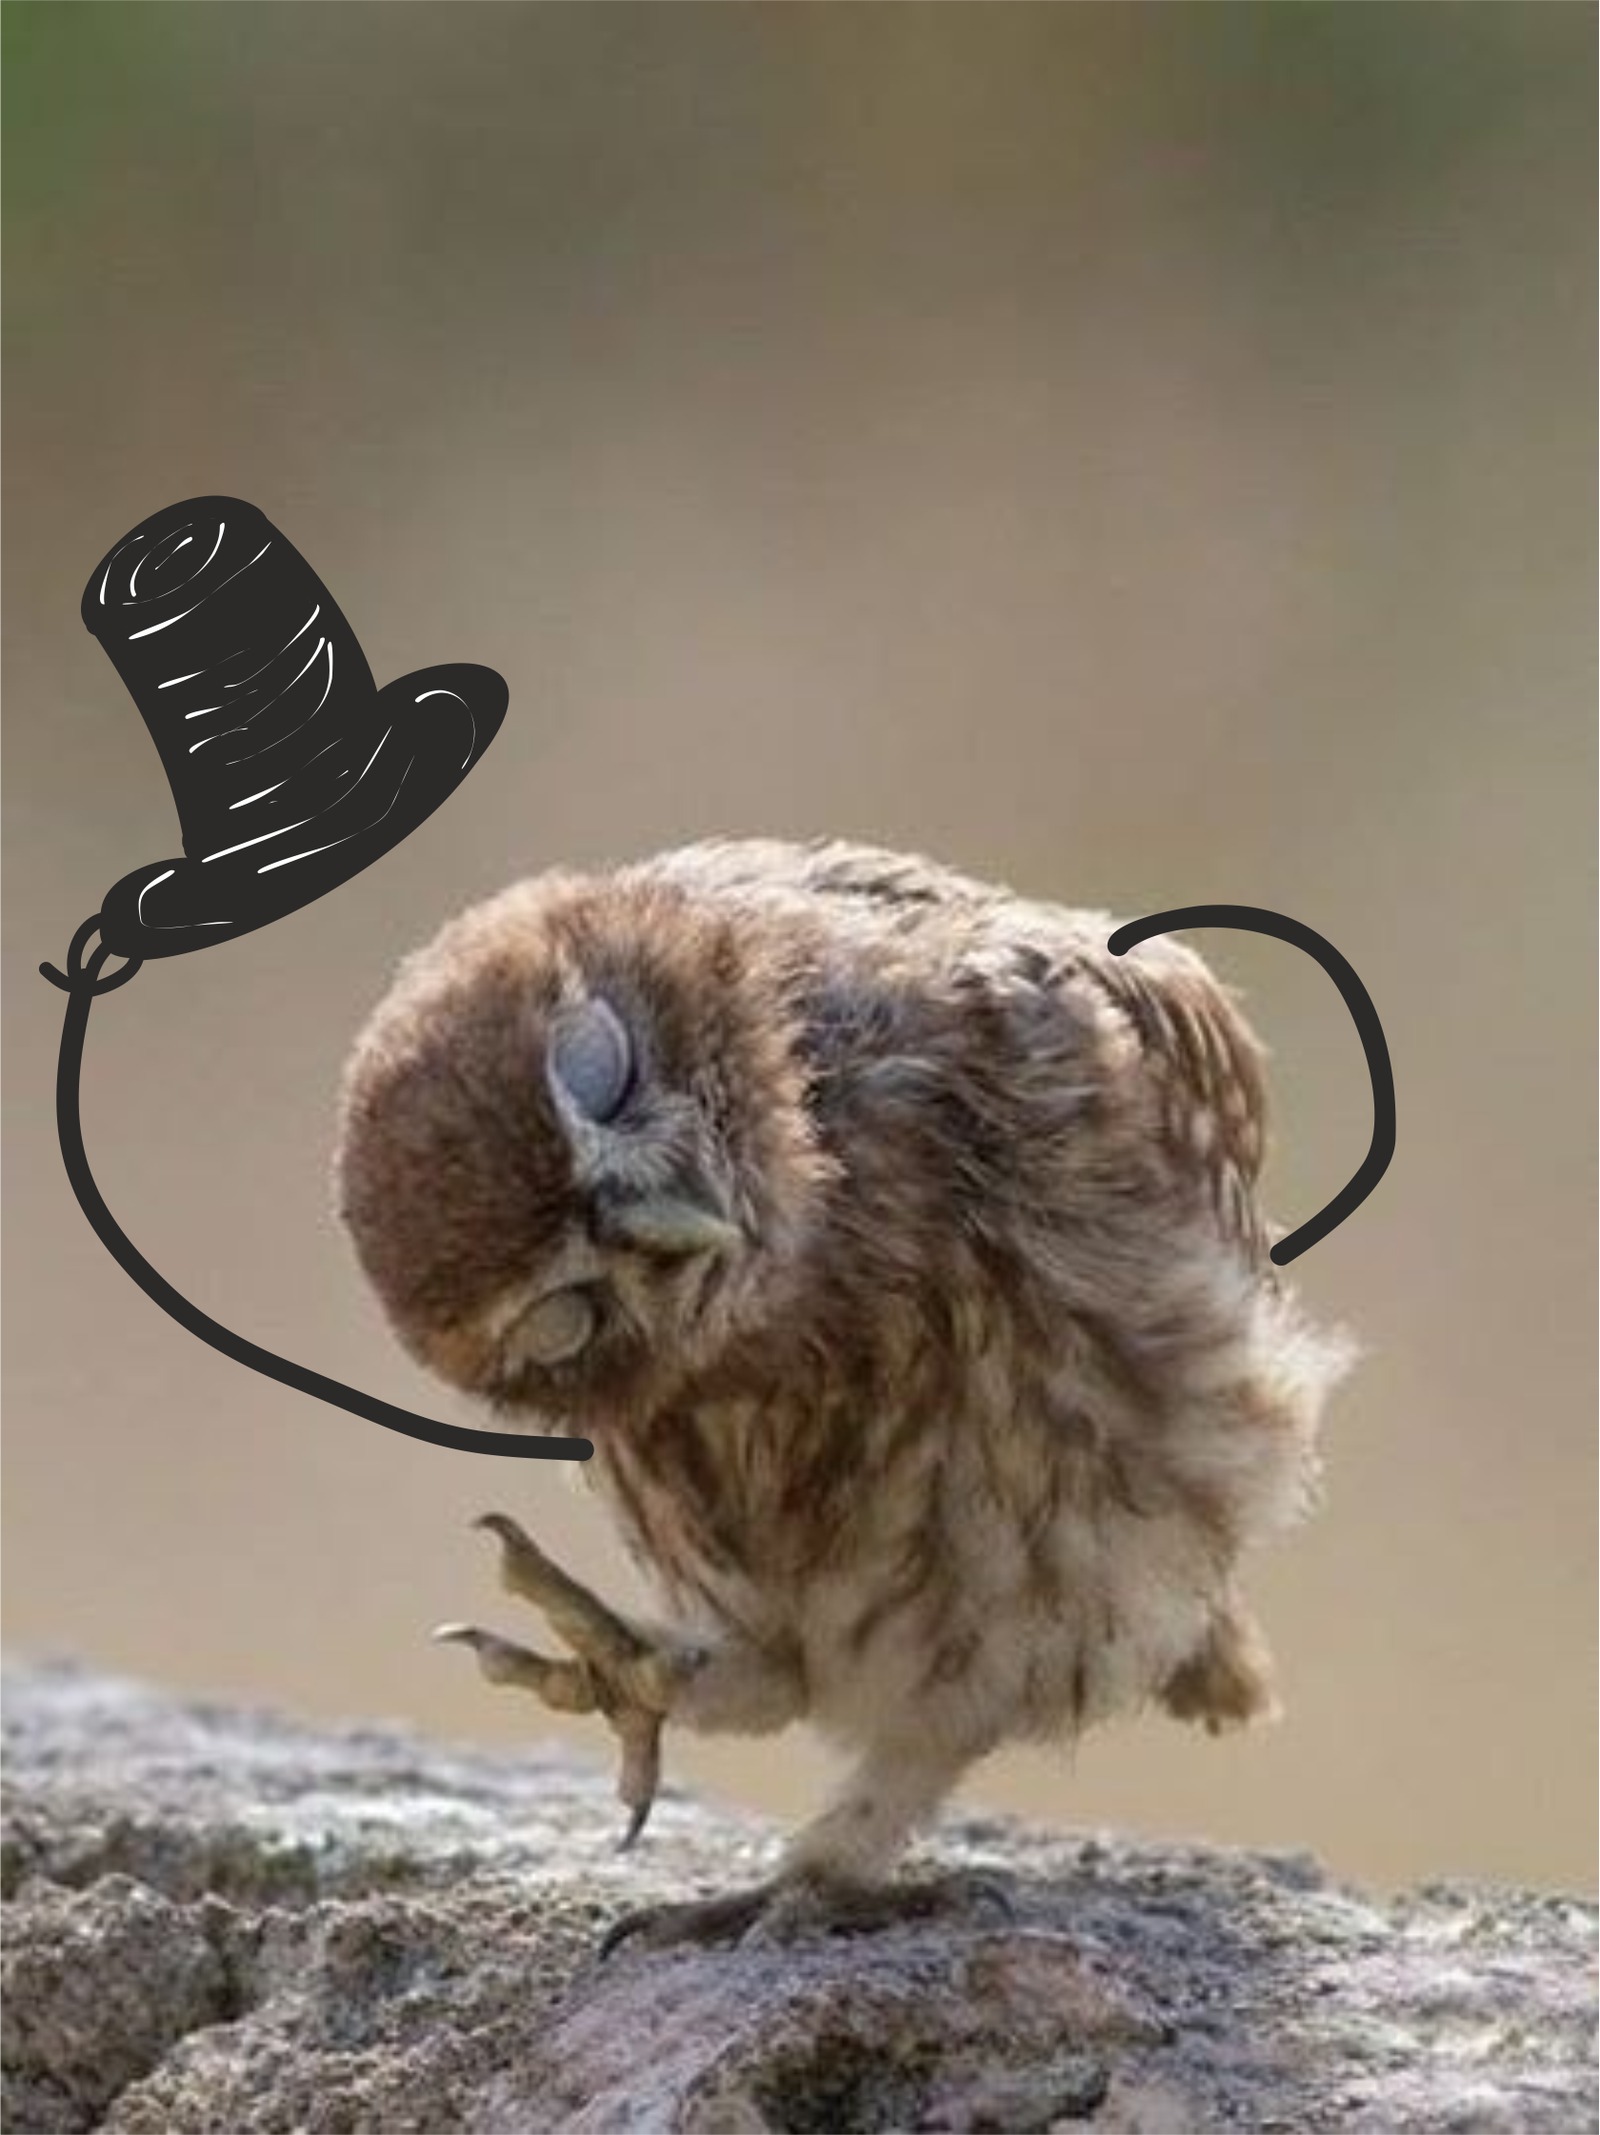 I take my hat off to you - My, Owl, Memes, The photo